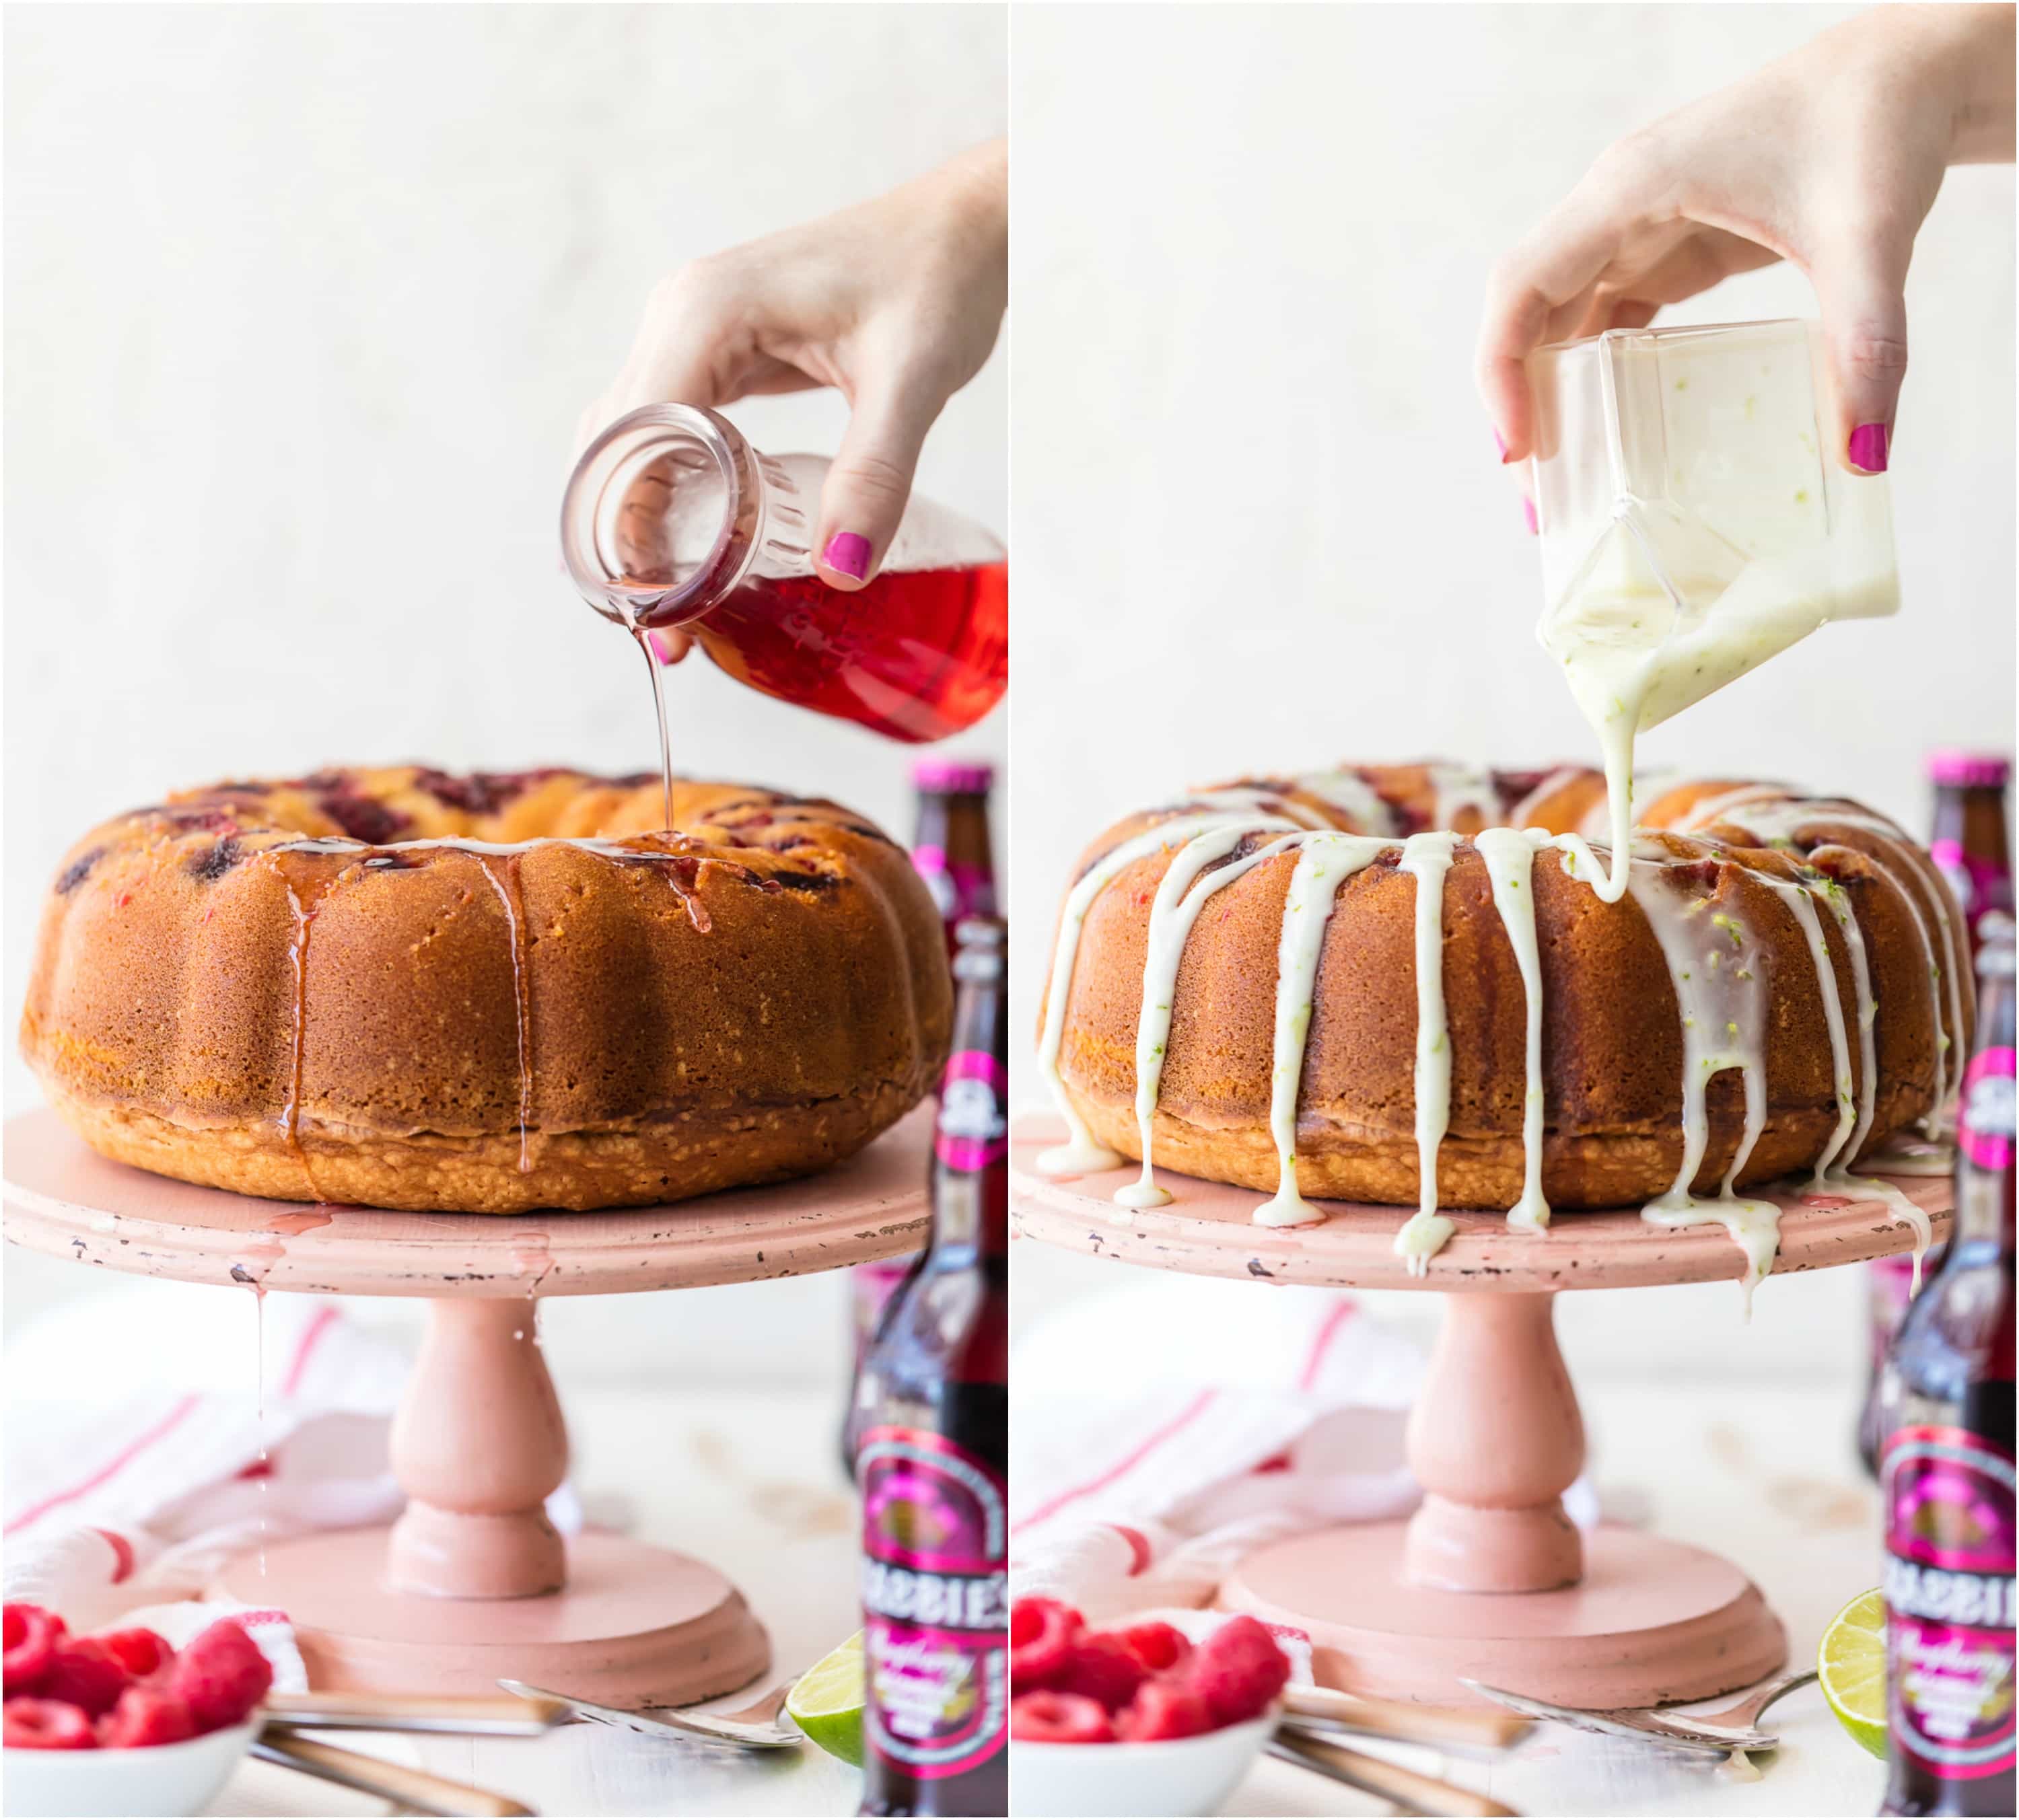 This RASPBERRY MOSCOW MULE CAKE makes life a little bit sweeter! Made with fresh raspberries, ginger beer, raspberry moscow mule simple syrup, and fresh lime glaze! YUM!